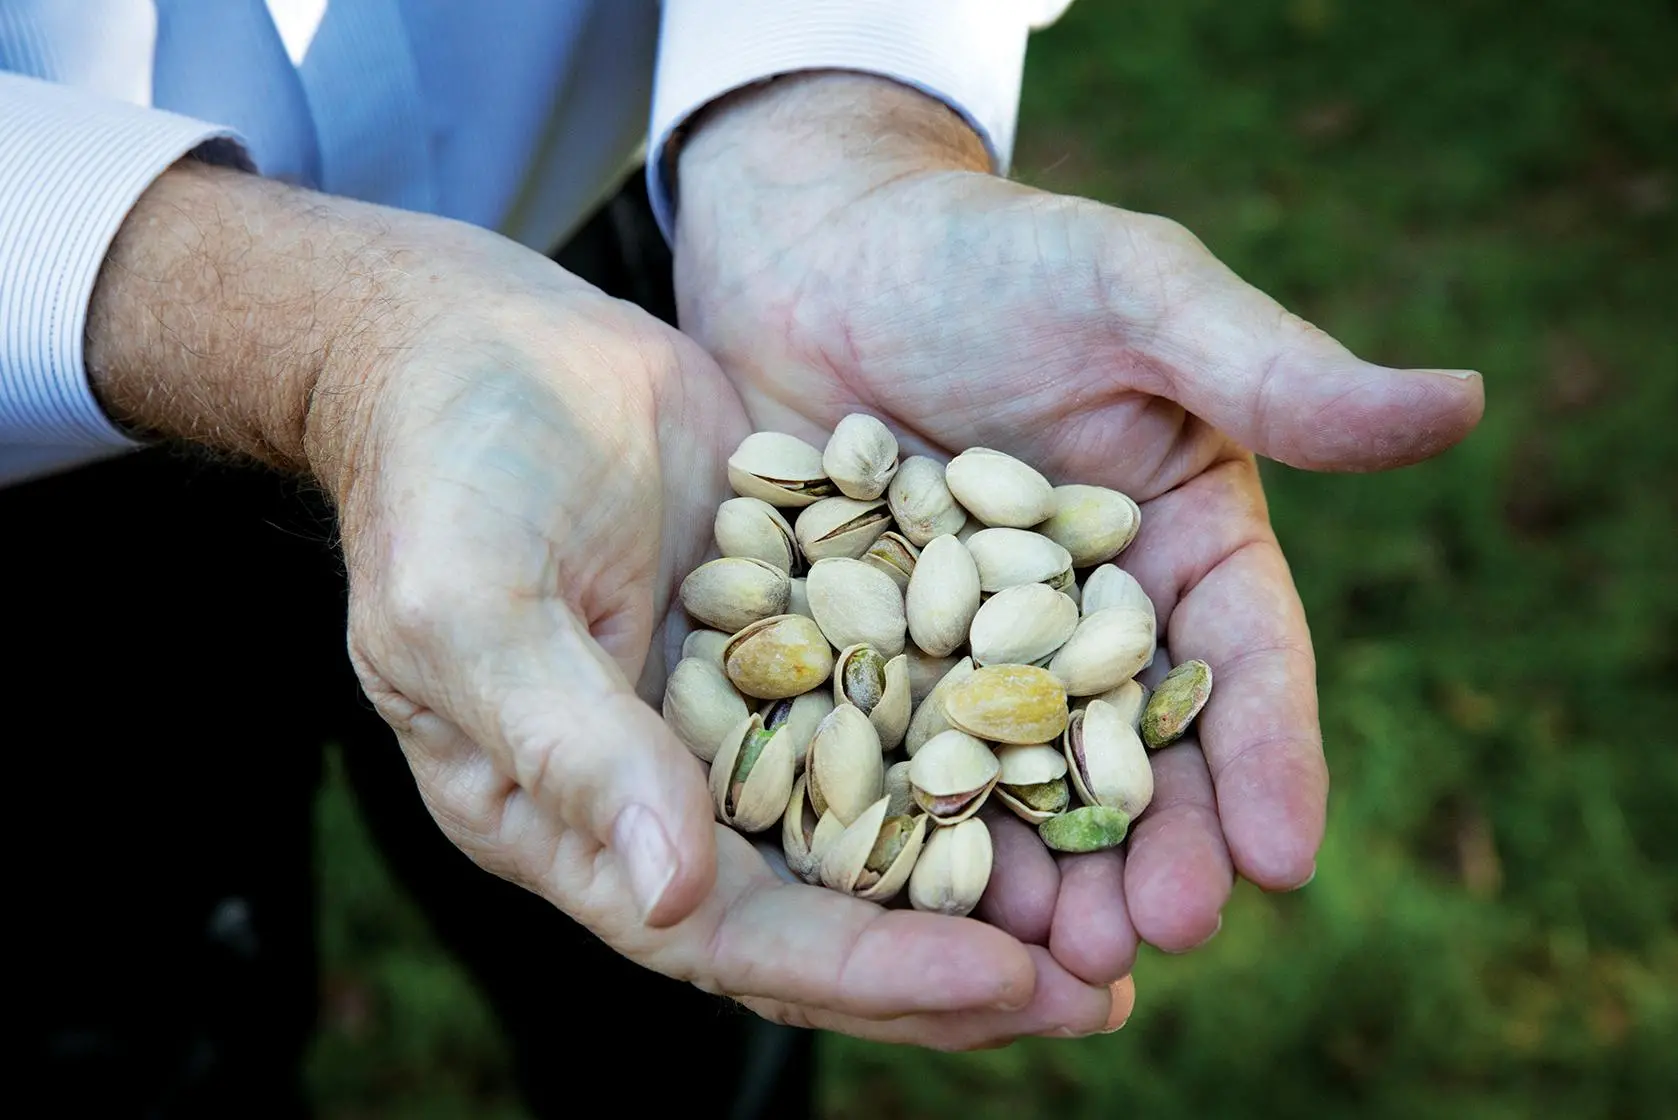 An image of cupped hands holding pistachios